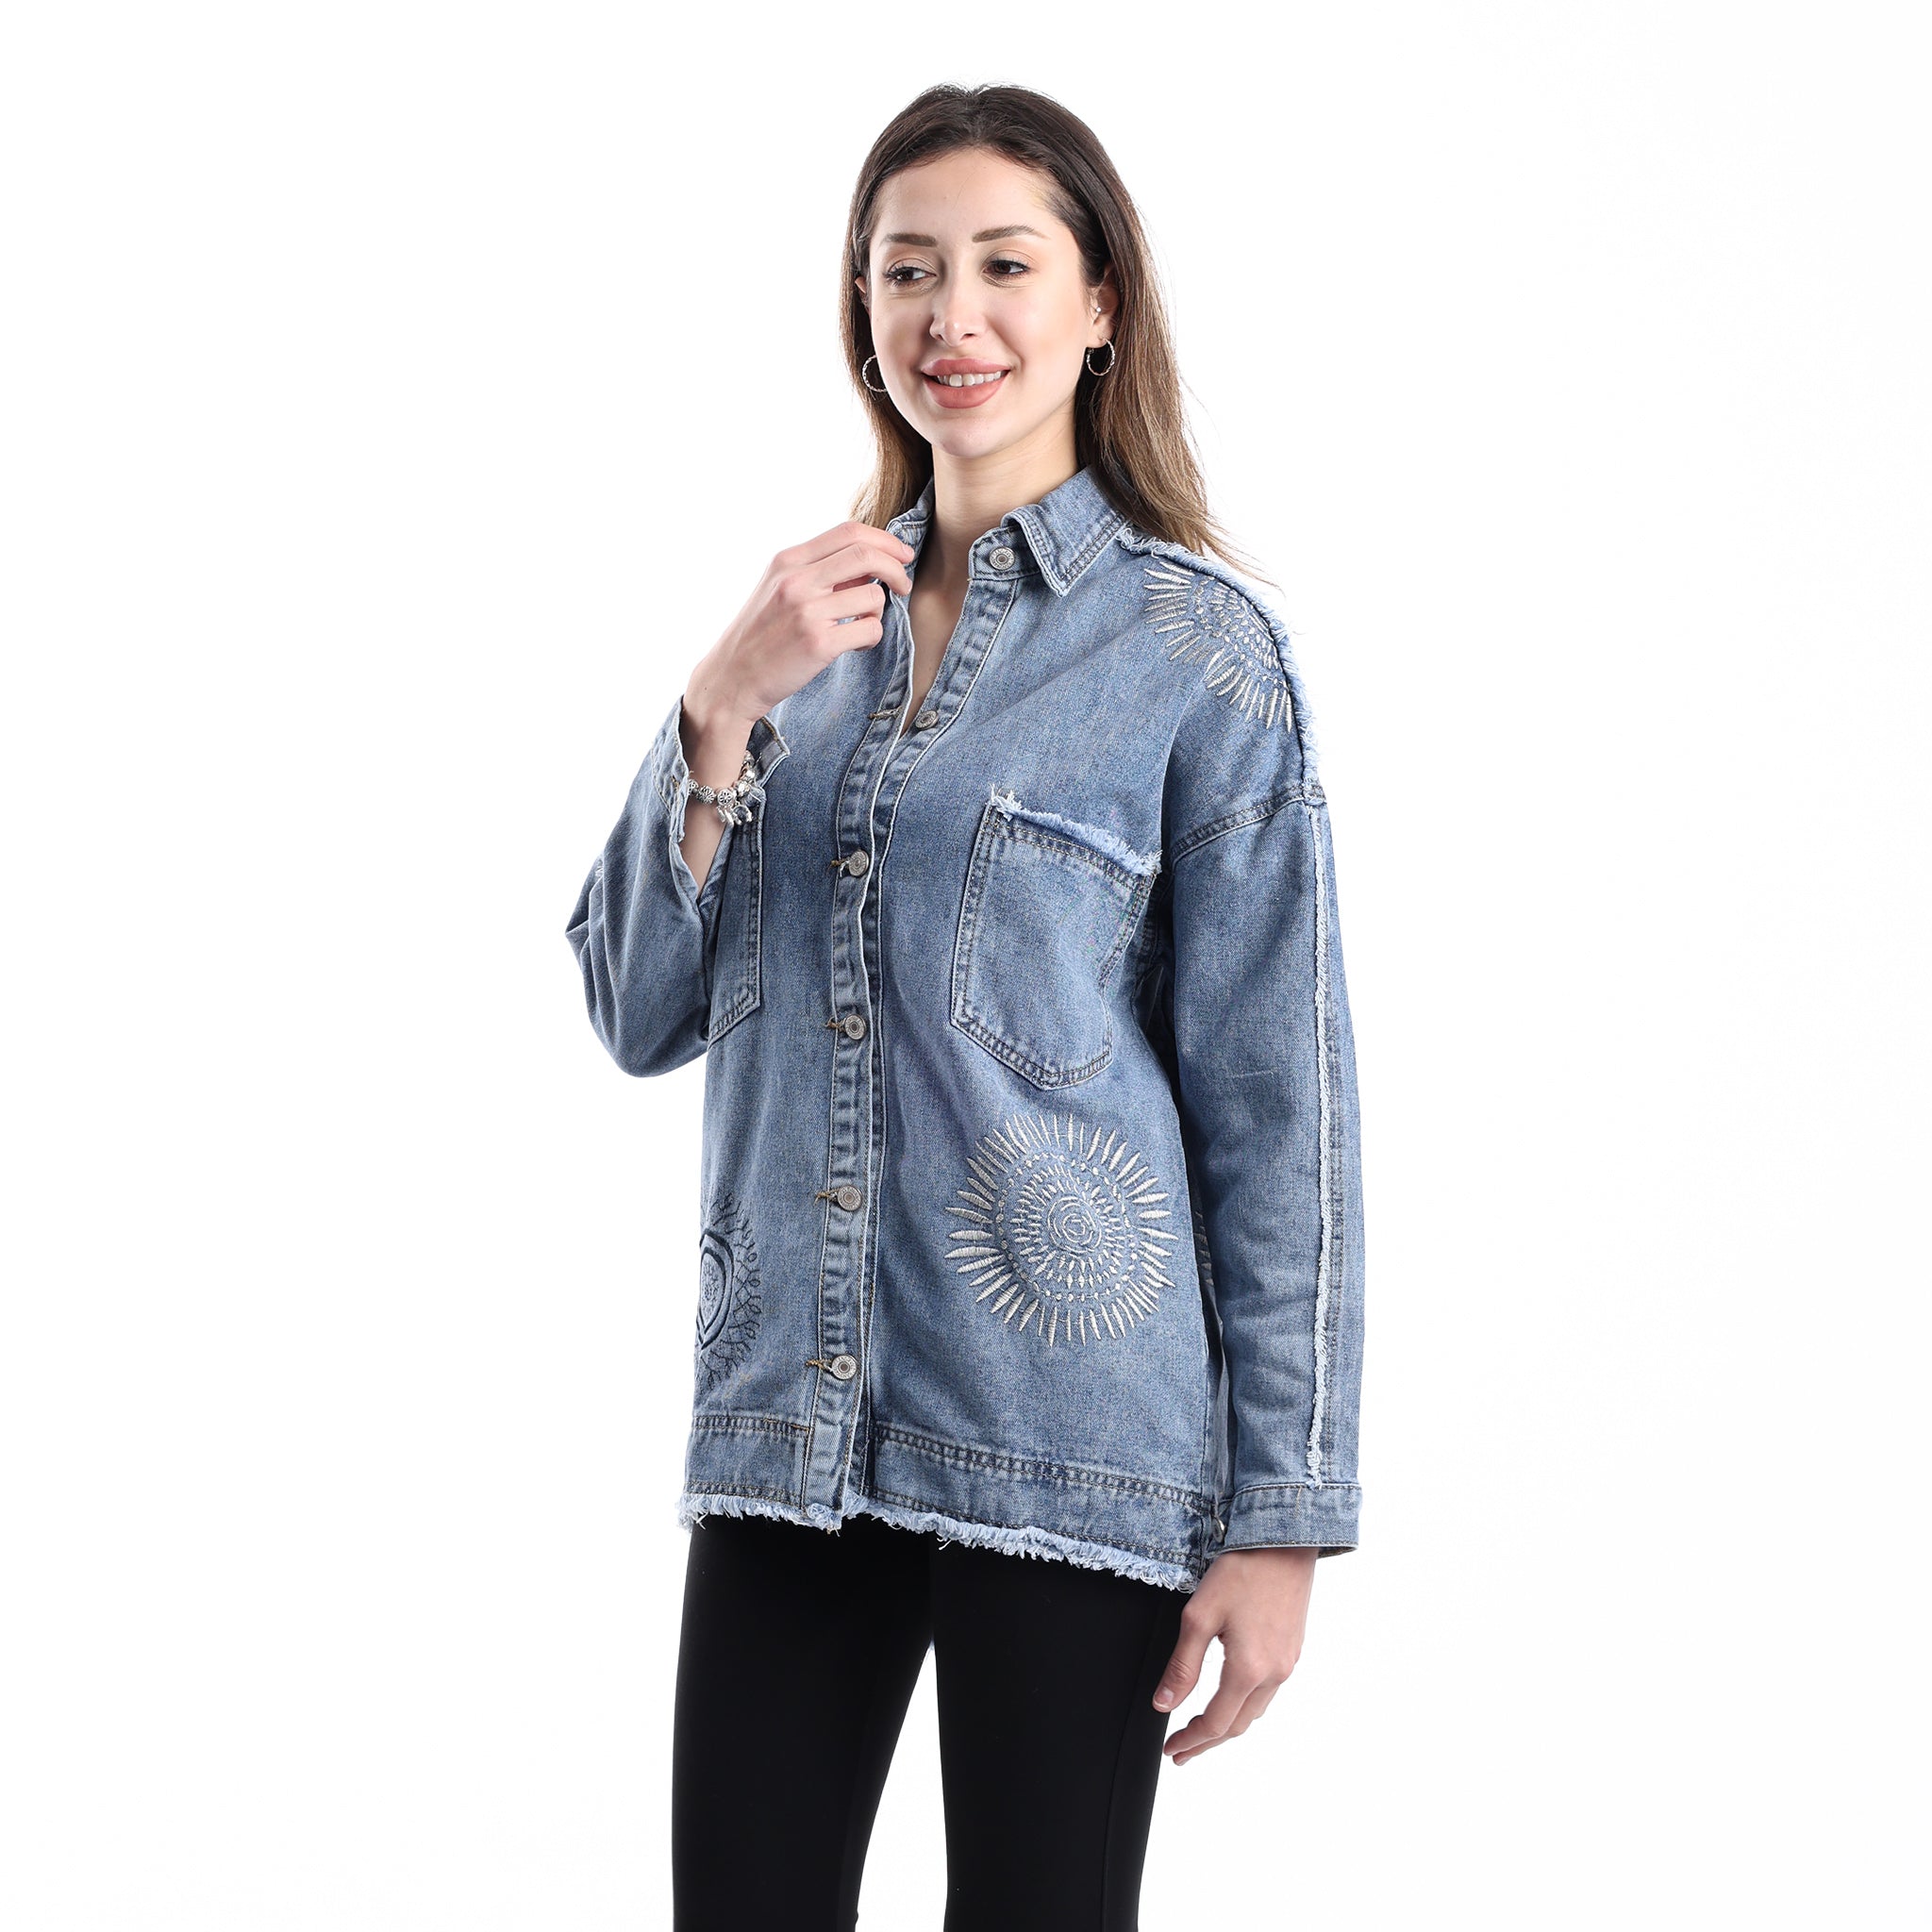 Jeans Jacket Ripped design